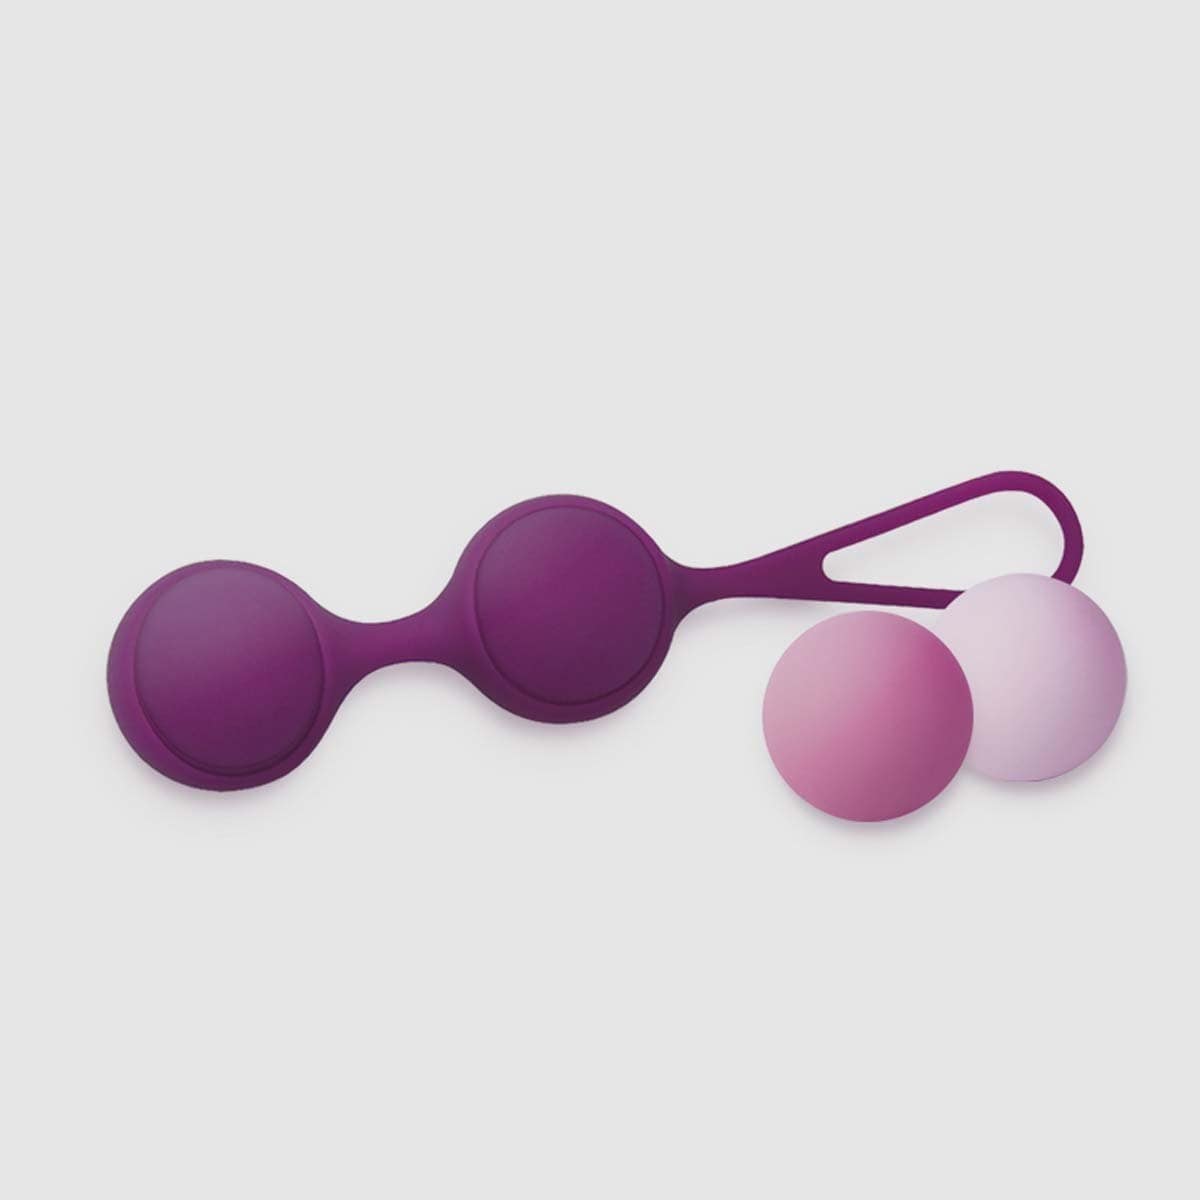 Kegel Balls Kits - Assorted Pink - Thorn & Feather Sex Toy Canada